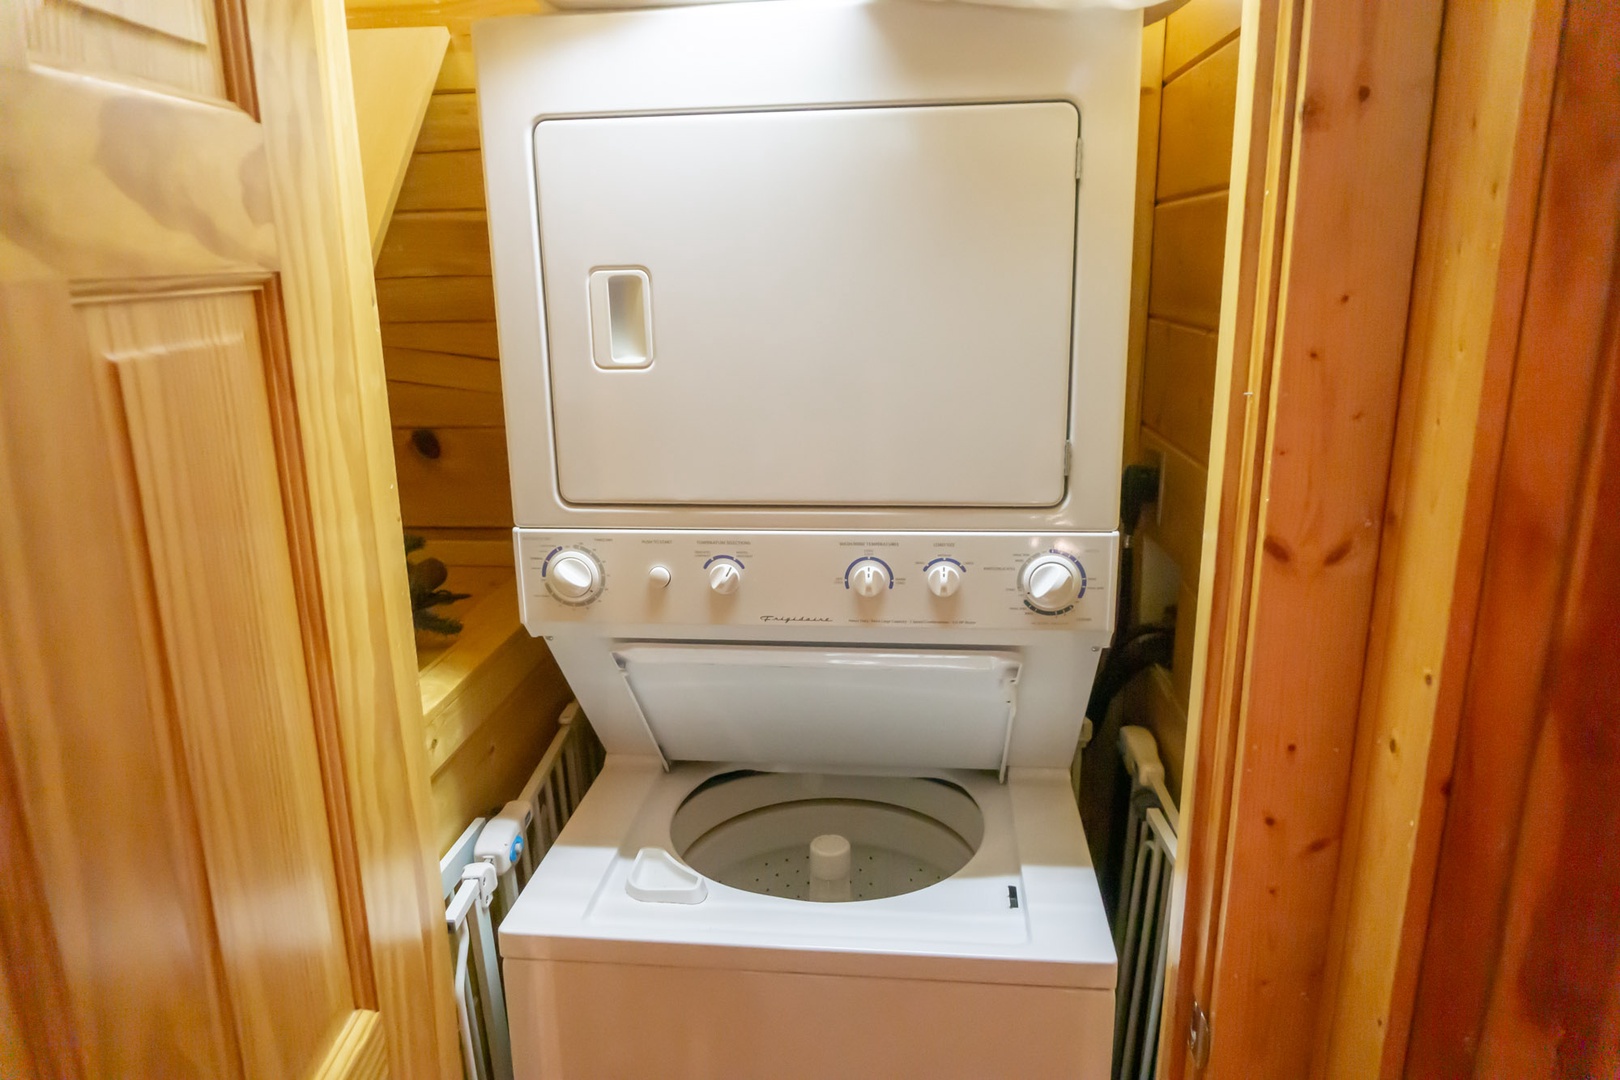 Washer and Dryer at Family Ties Lodge, a 4 bedroom cabin rental located in pigeon forge